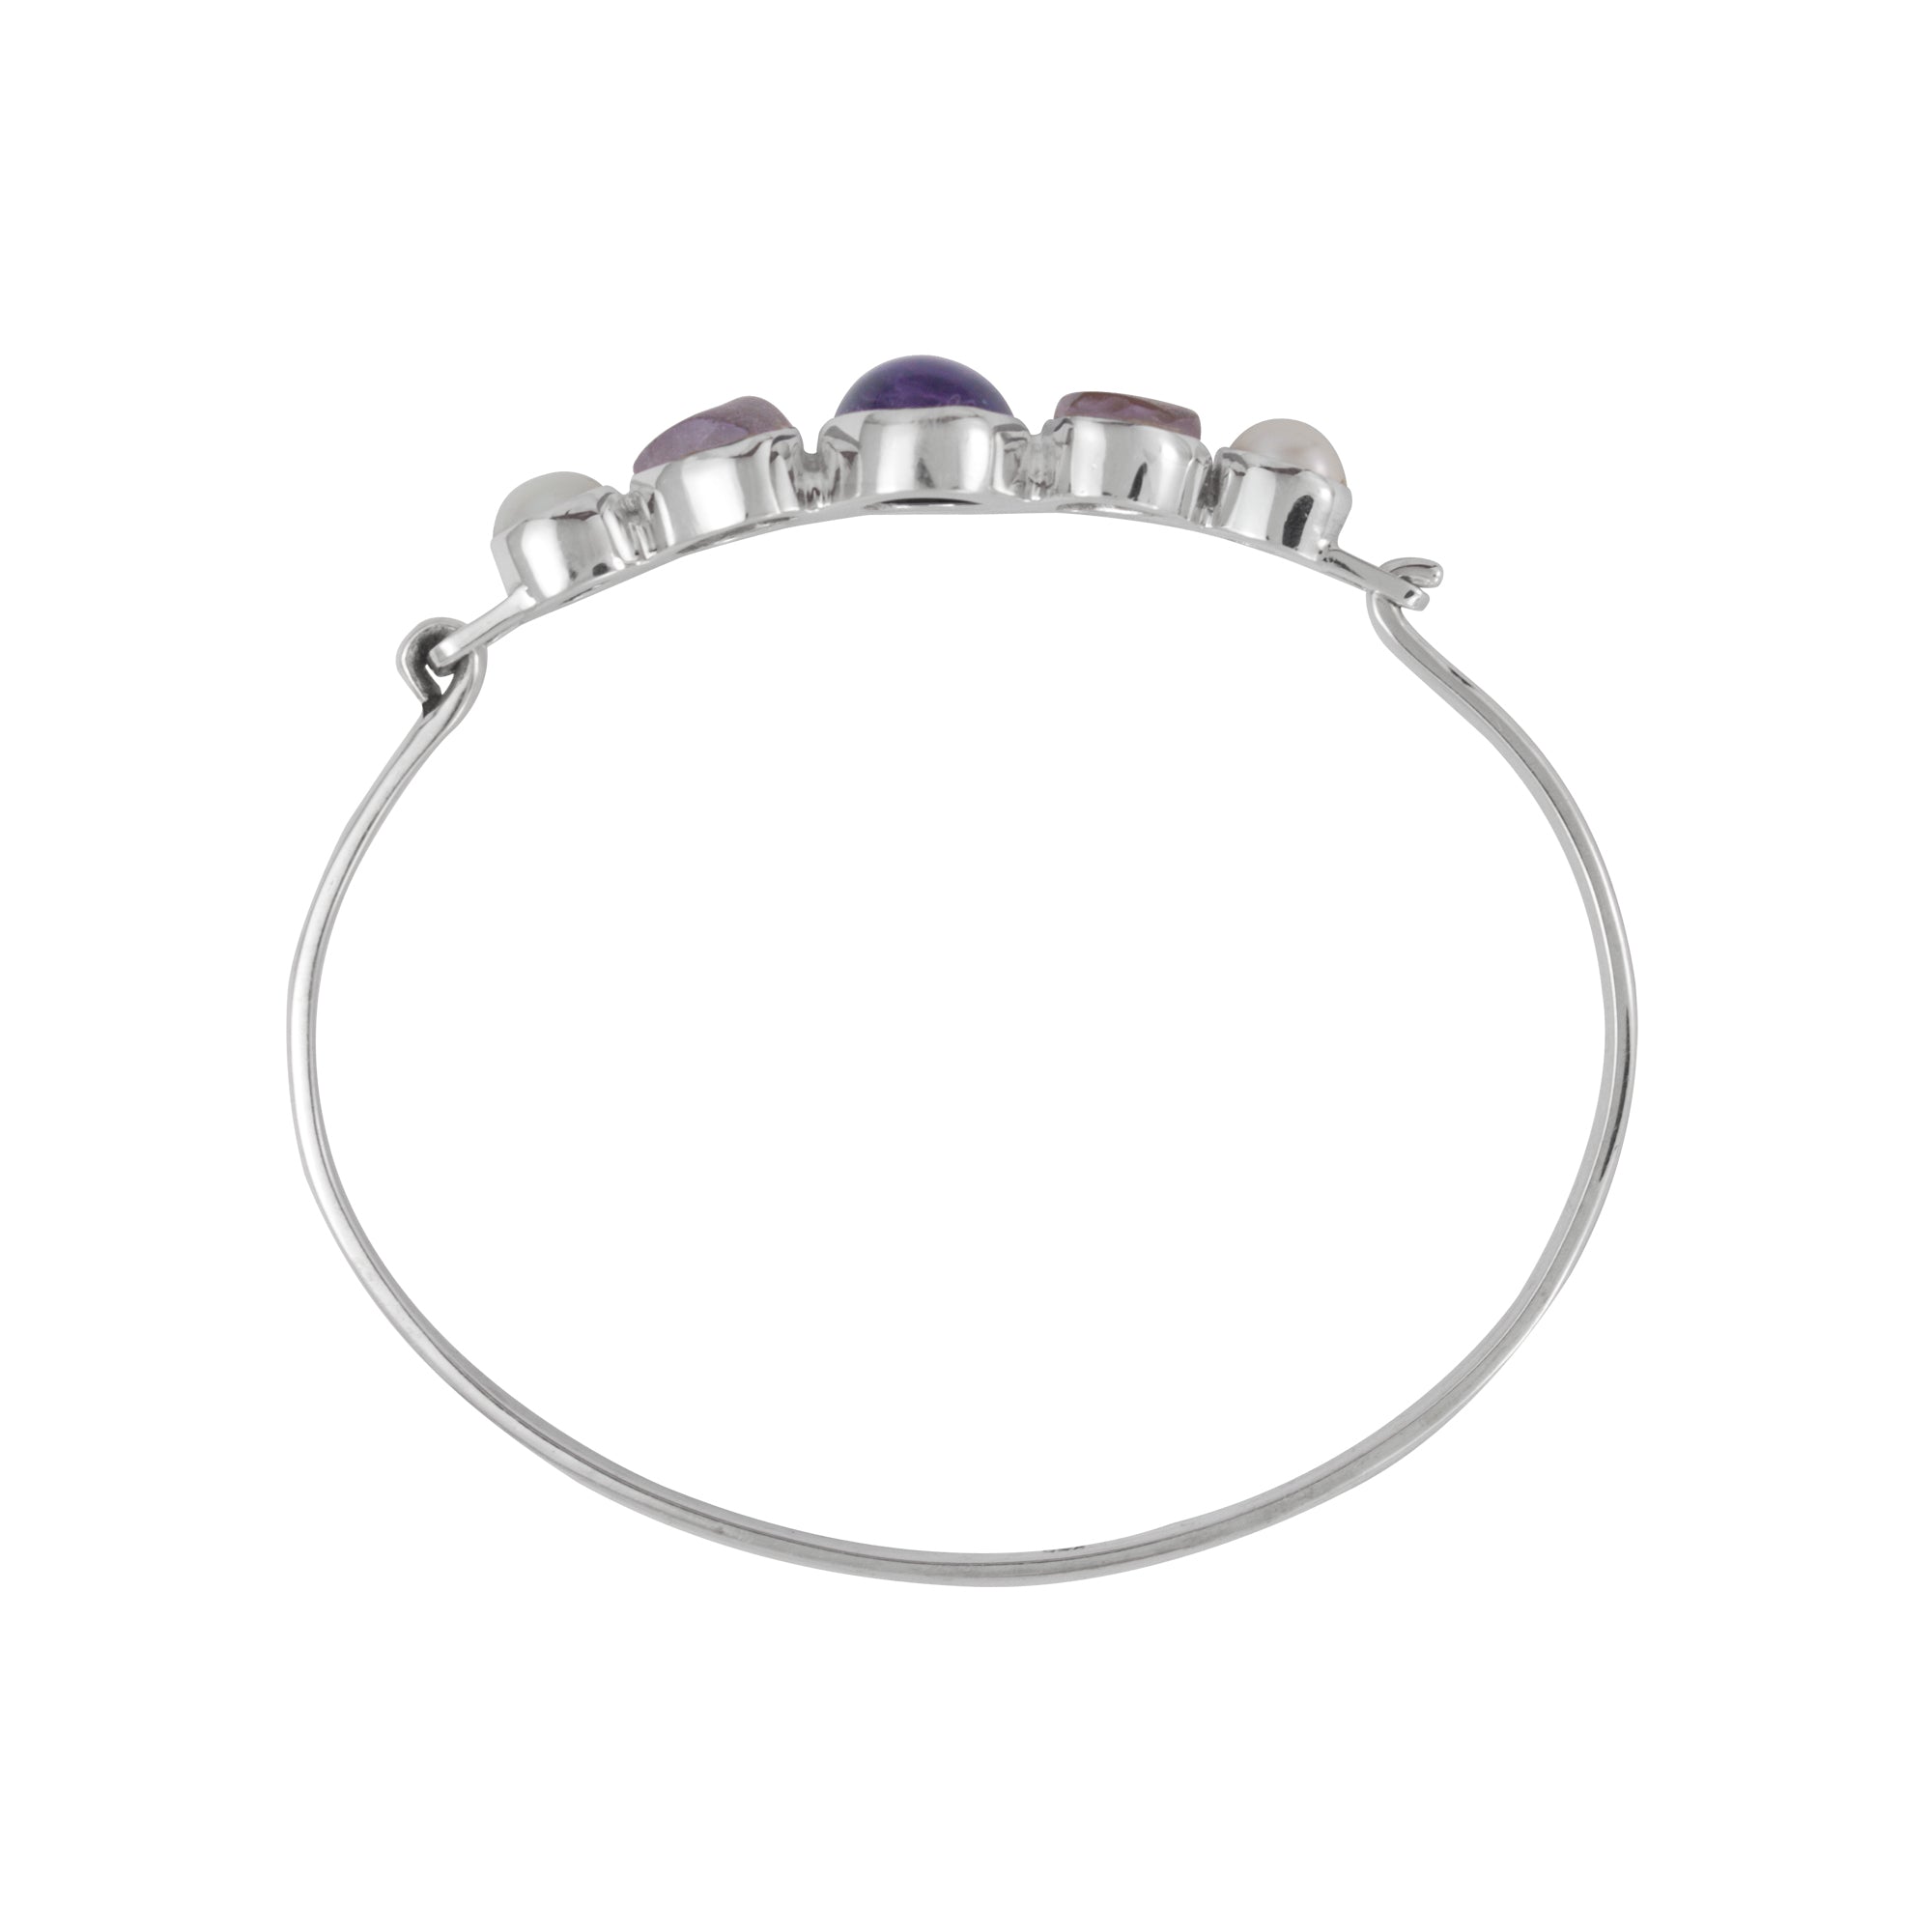 Sterling Siver Bracelet With Amethyst Oval Cabison, Sea Glass Lavender, Pearl Round